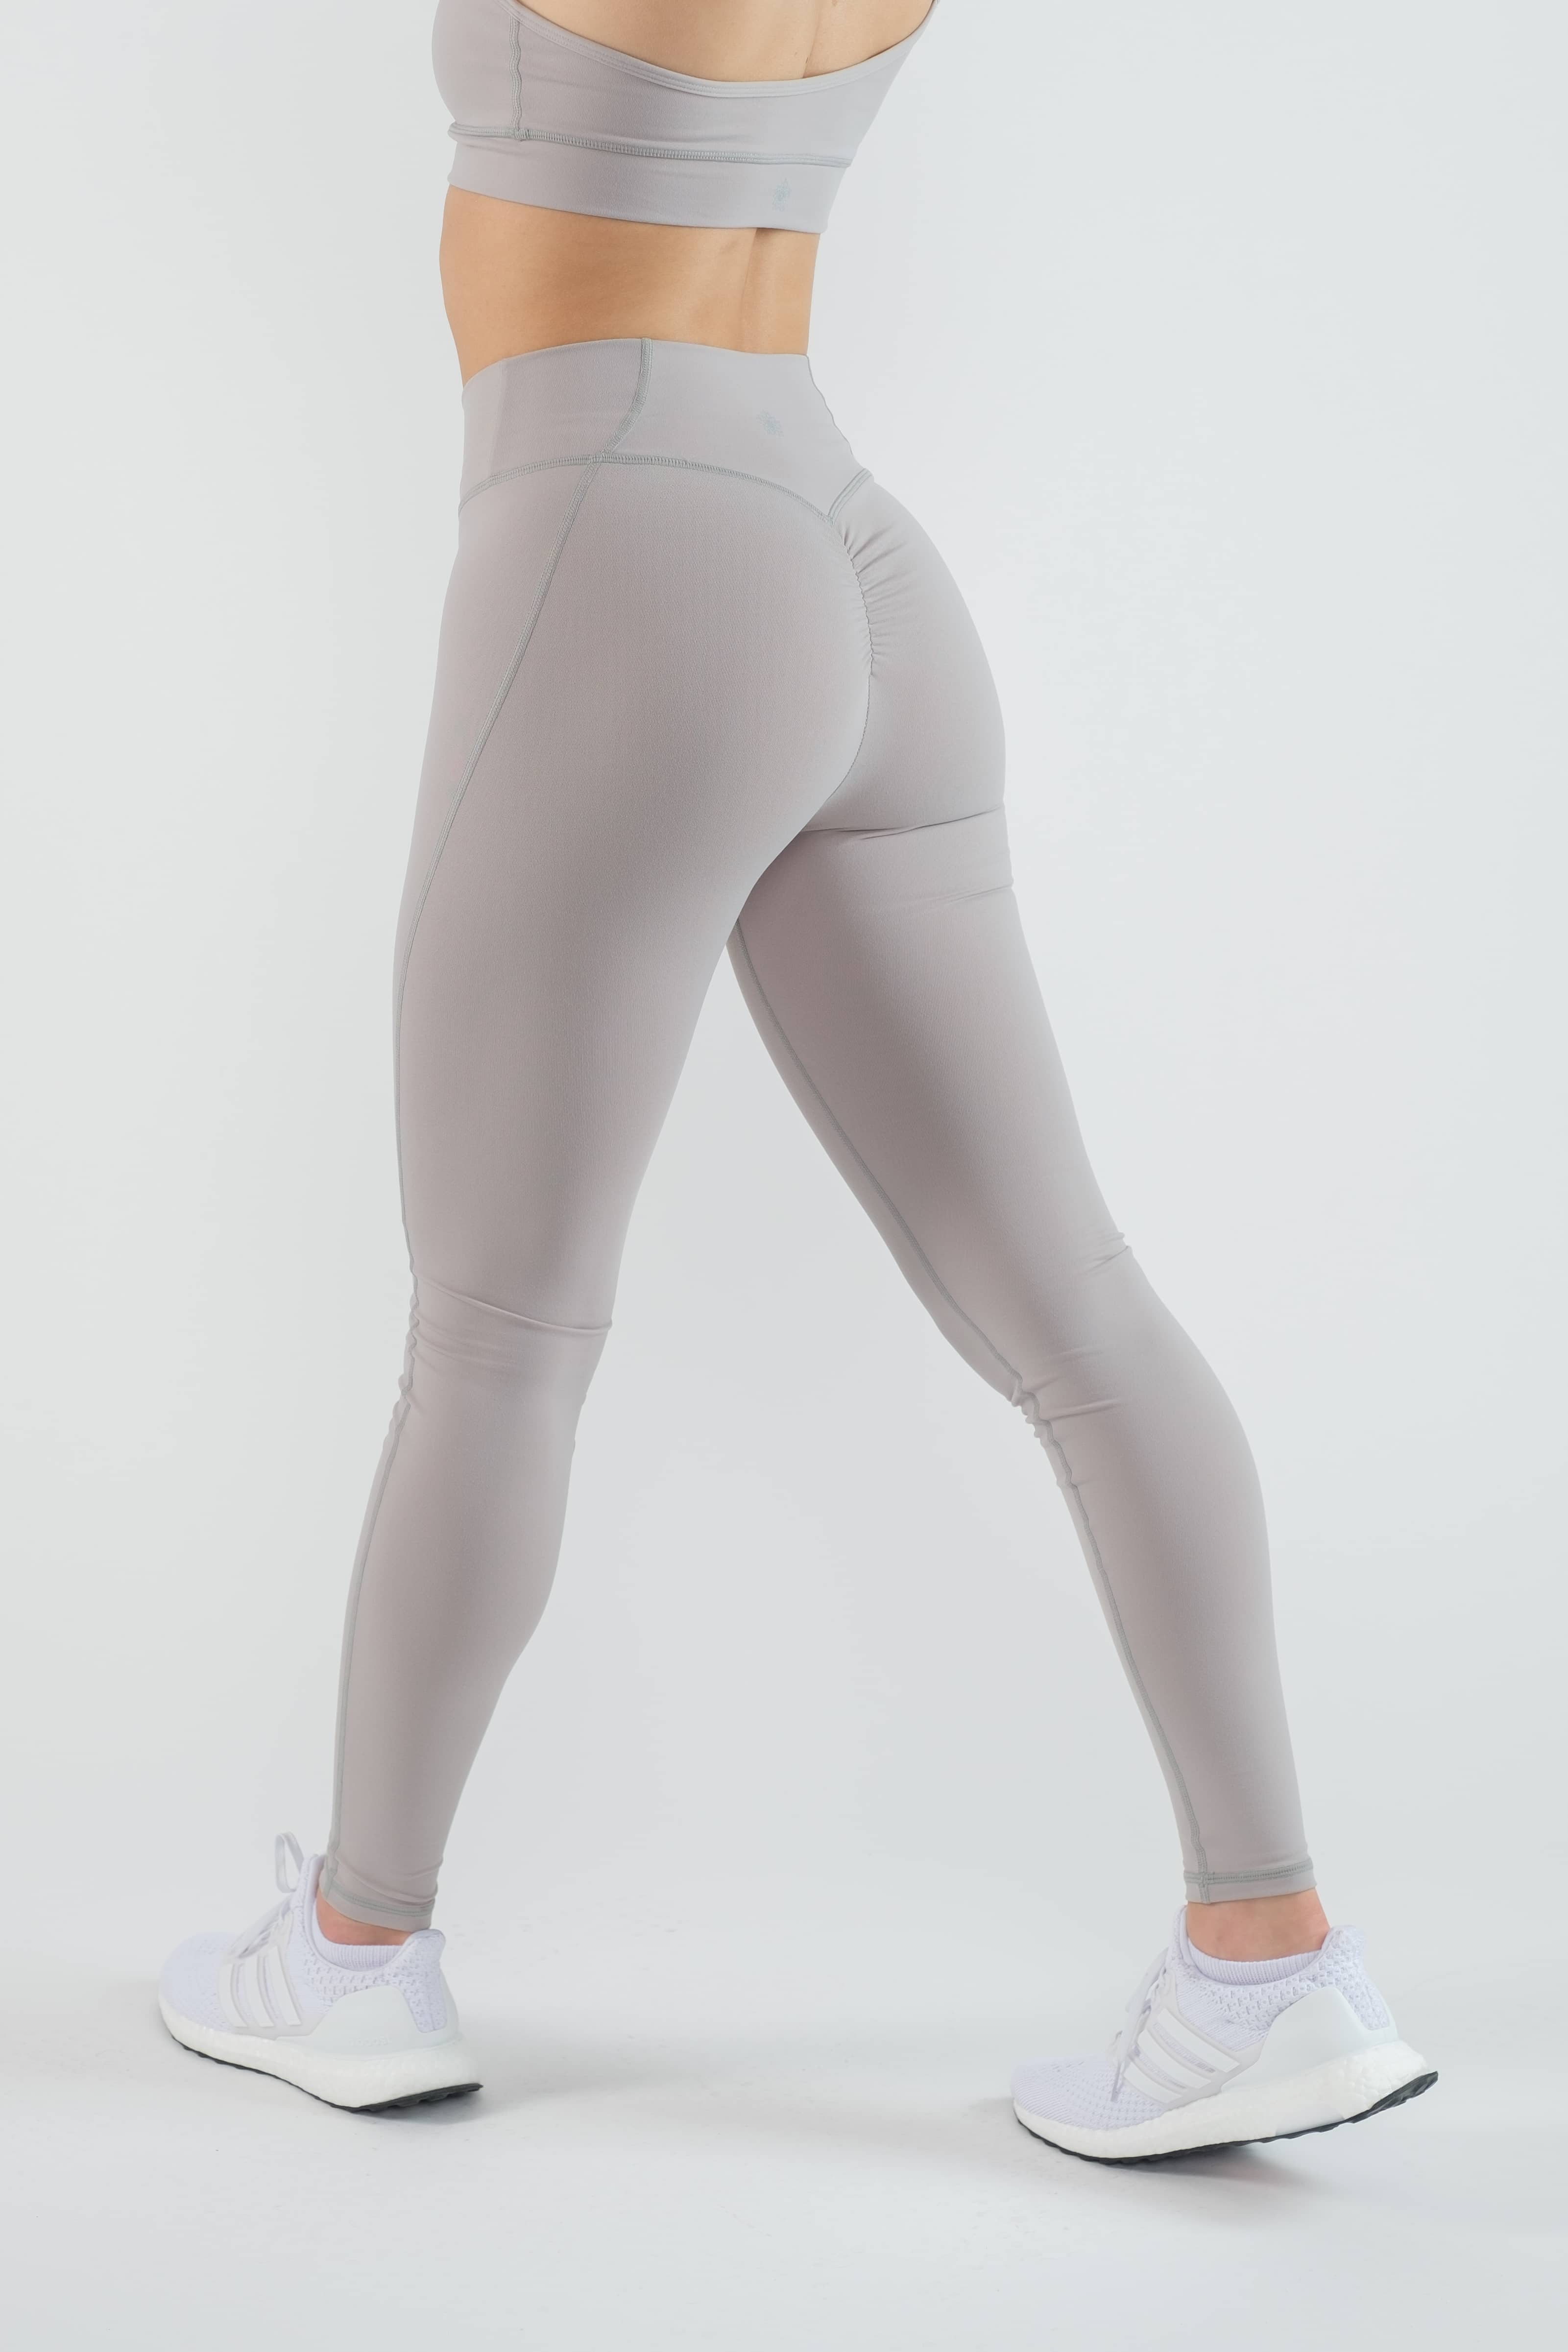 Set Active BLOOM SCULPTFLEX® LEGGINGS - XS Tan - $32 (46% Off Retail) New  With Tags - From Gel